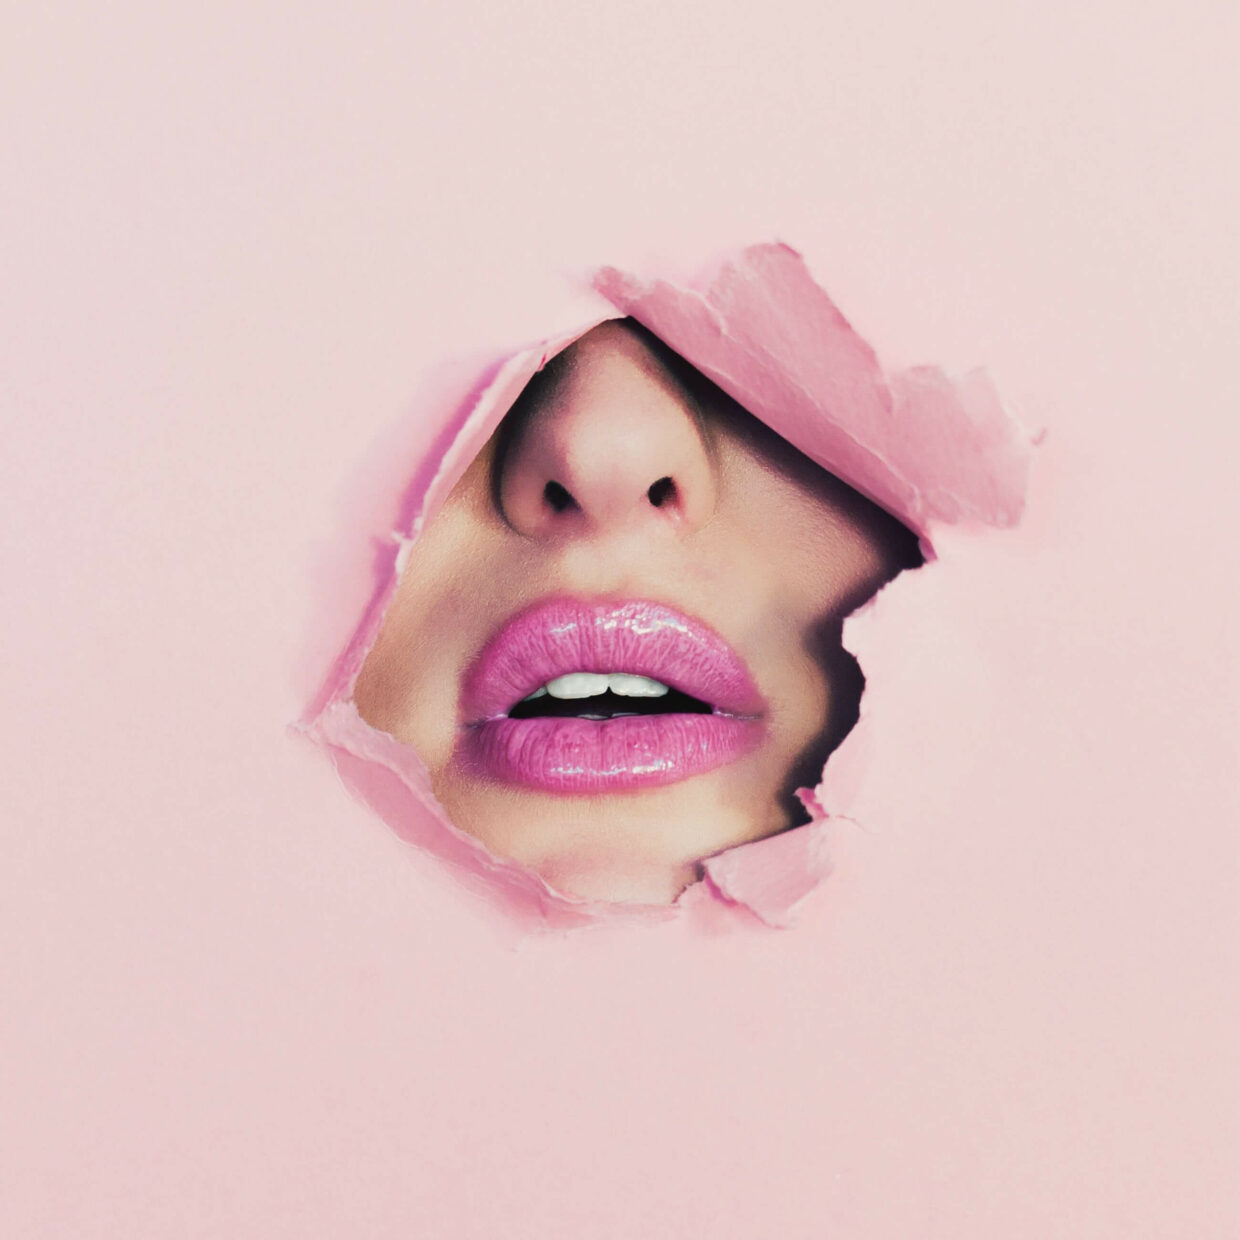 cropped-image-of-female-lips-seen-through-torn-royalty-free-image-15731186a52-scaled